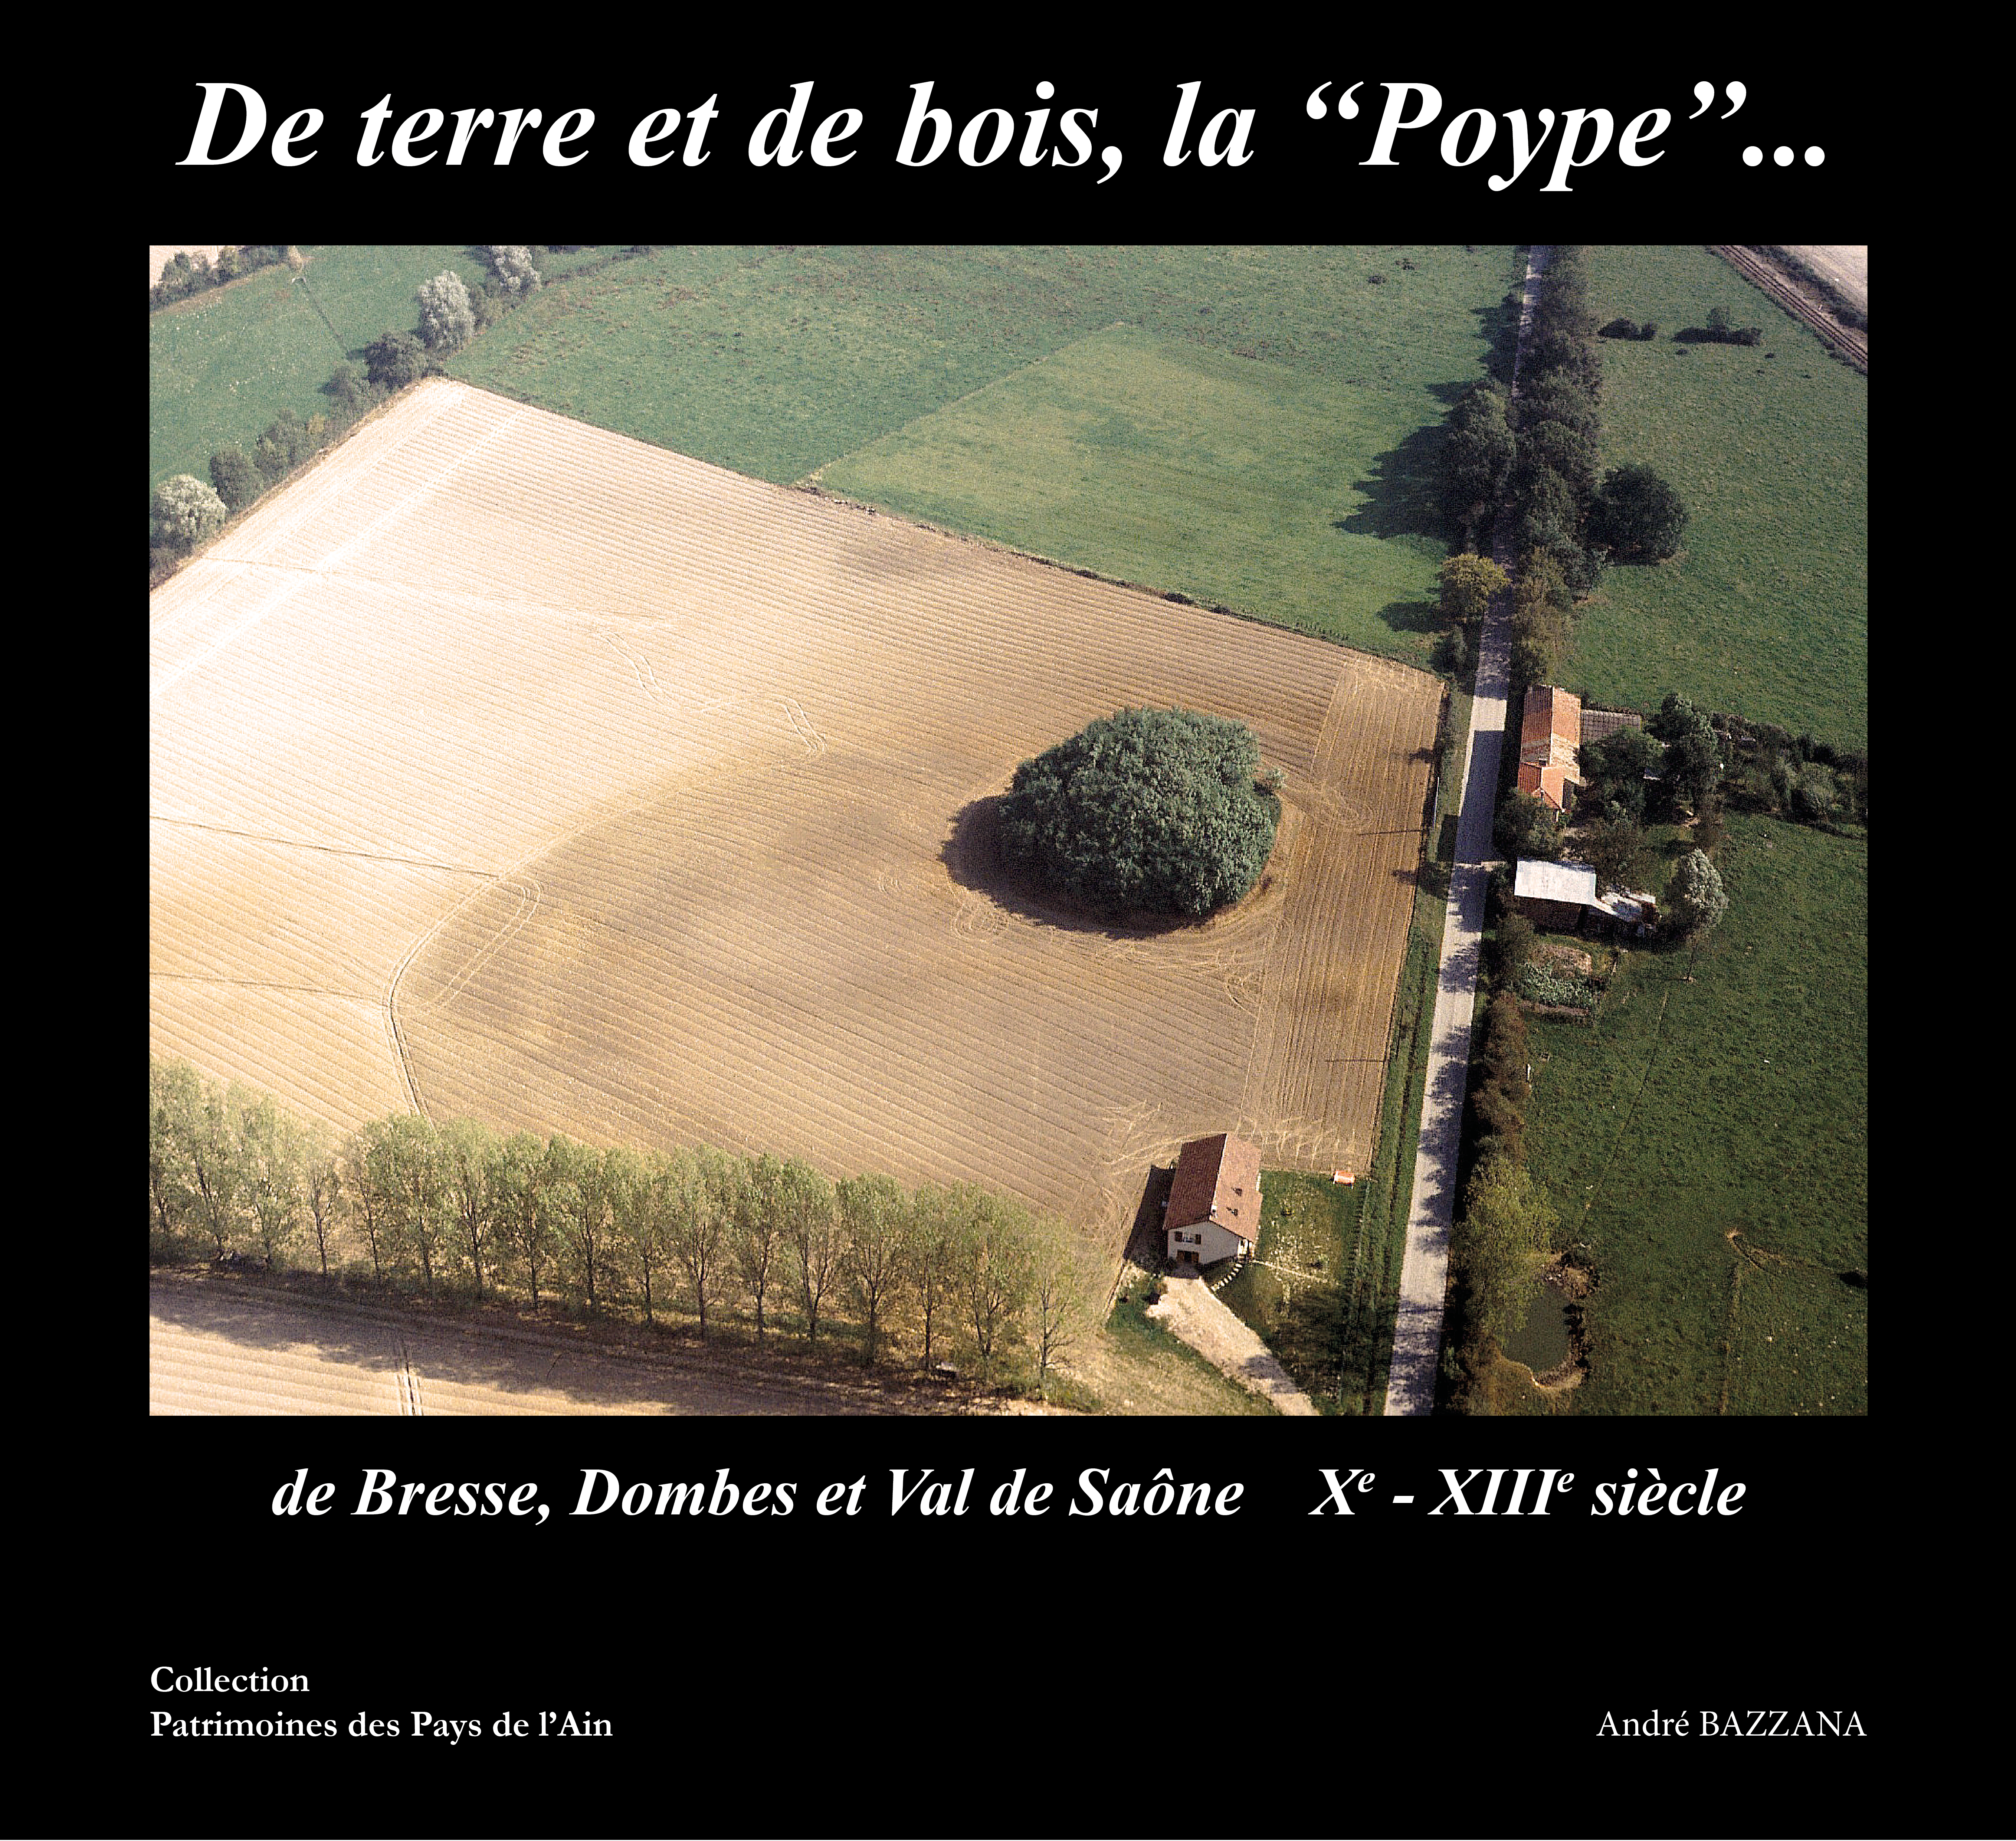 couverture poype